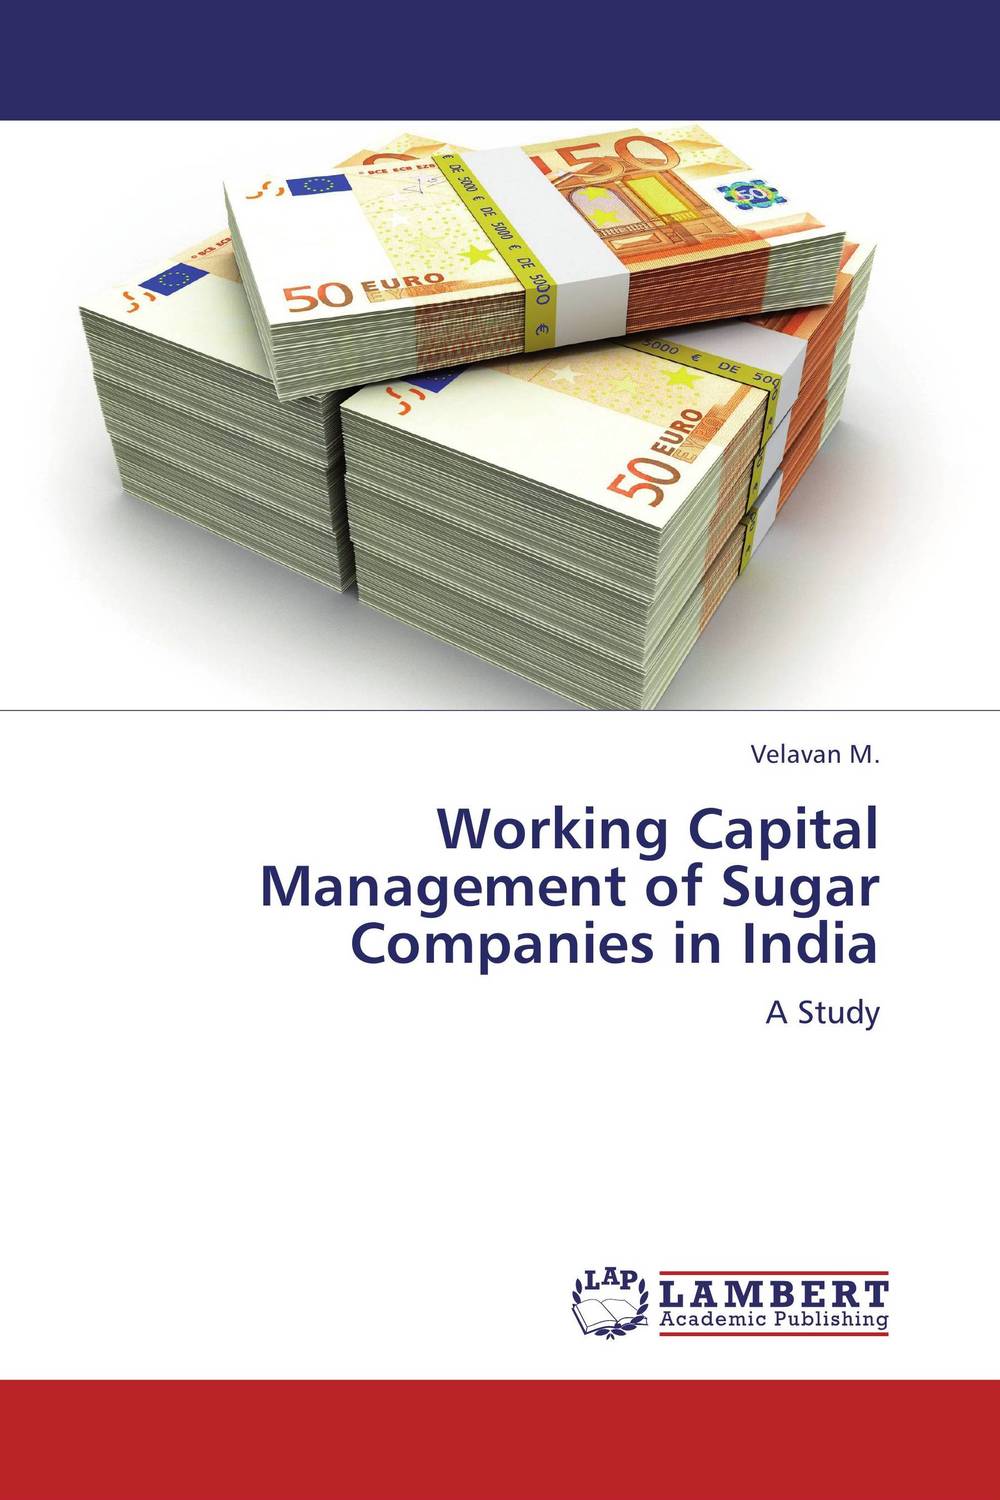 Working Capital Management of Sugar Companies in India